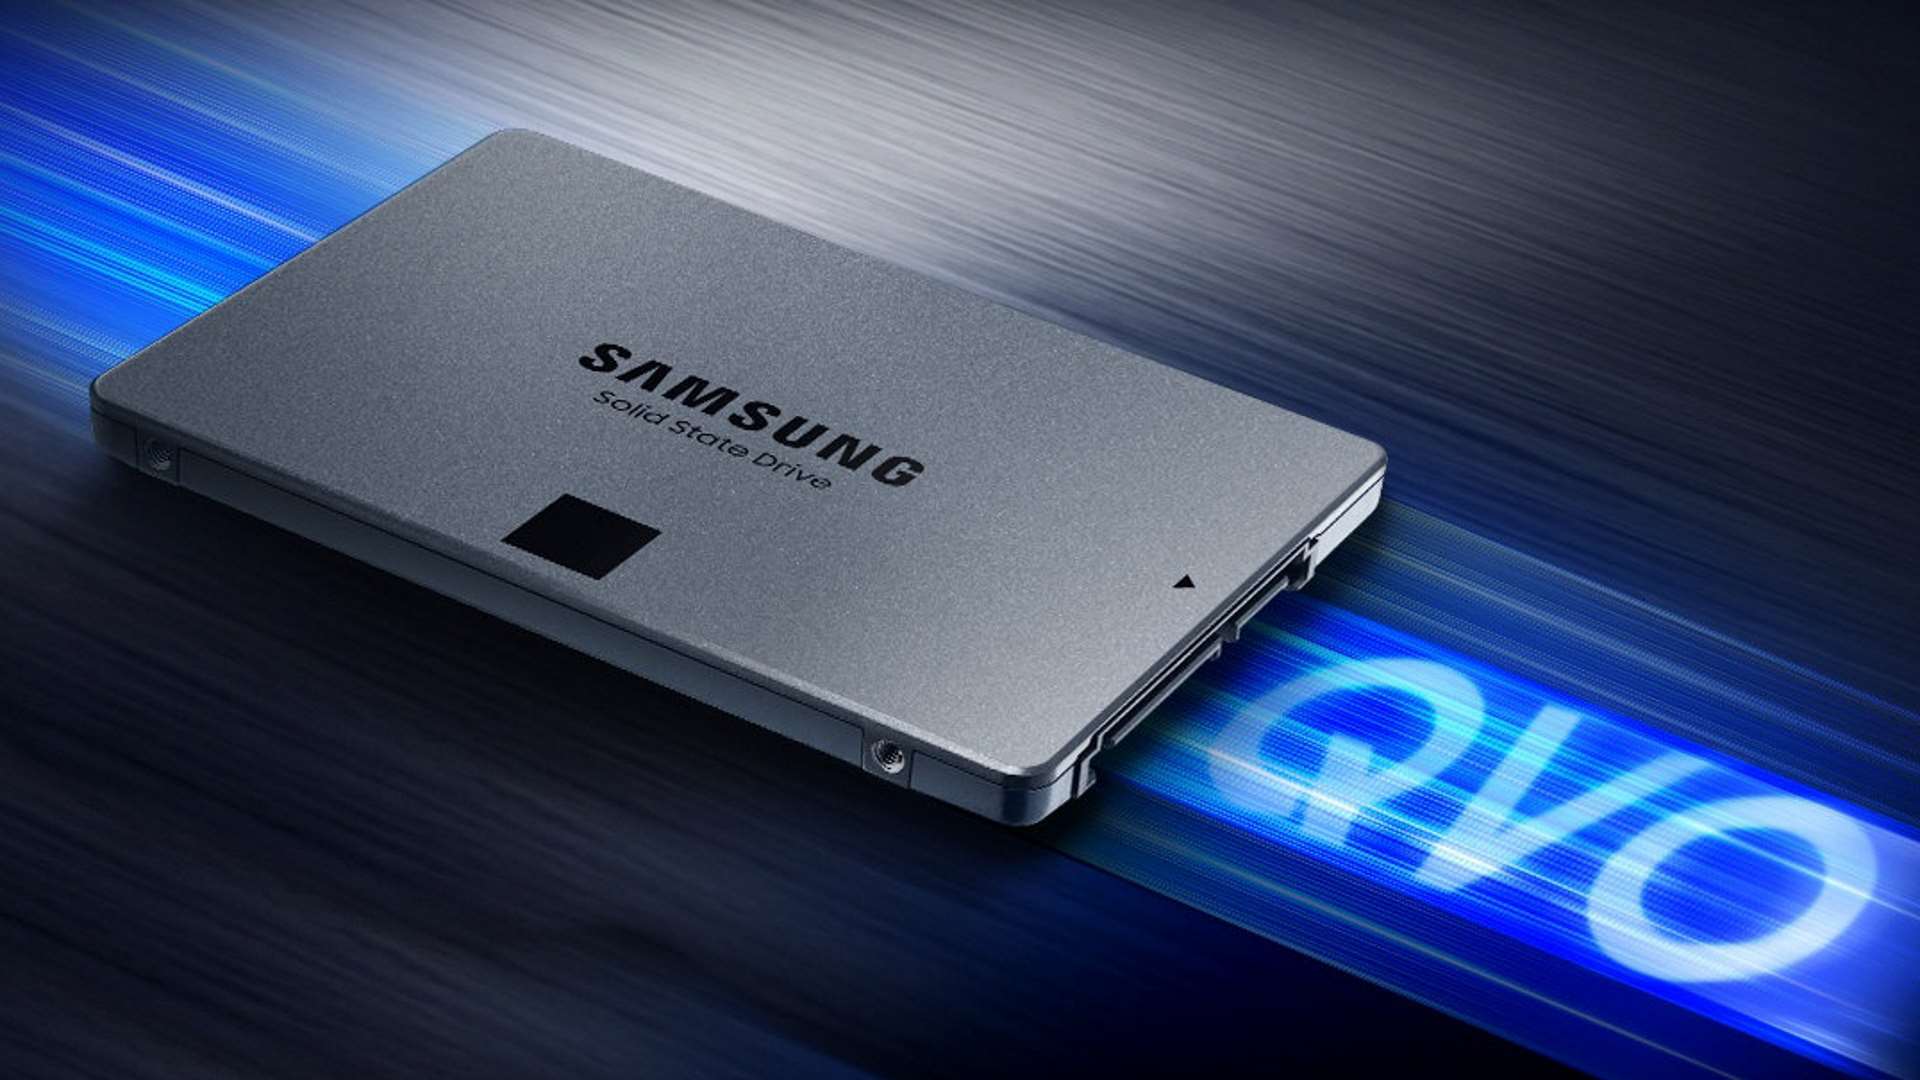 Samsung 860 QVO review: the first QLC SATA SSD, but it can’t topple TLC